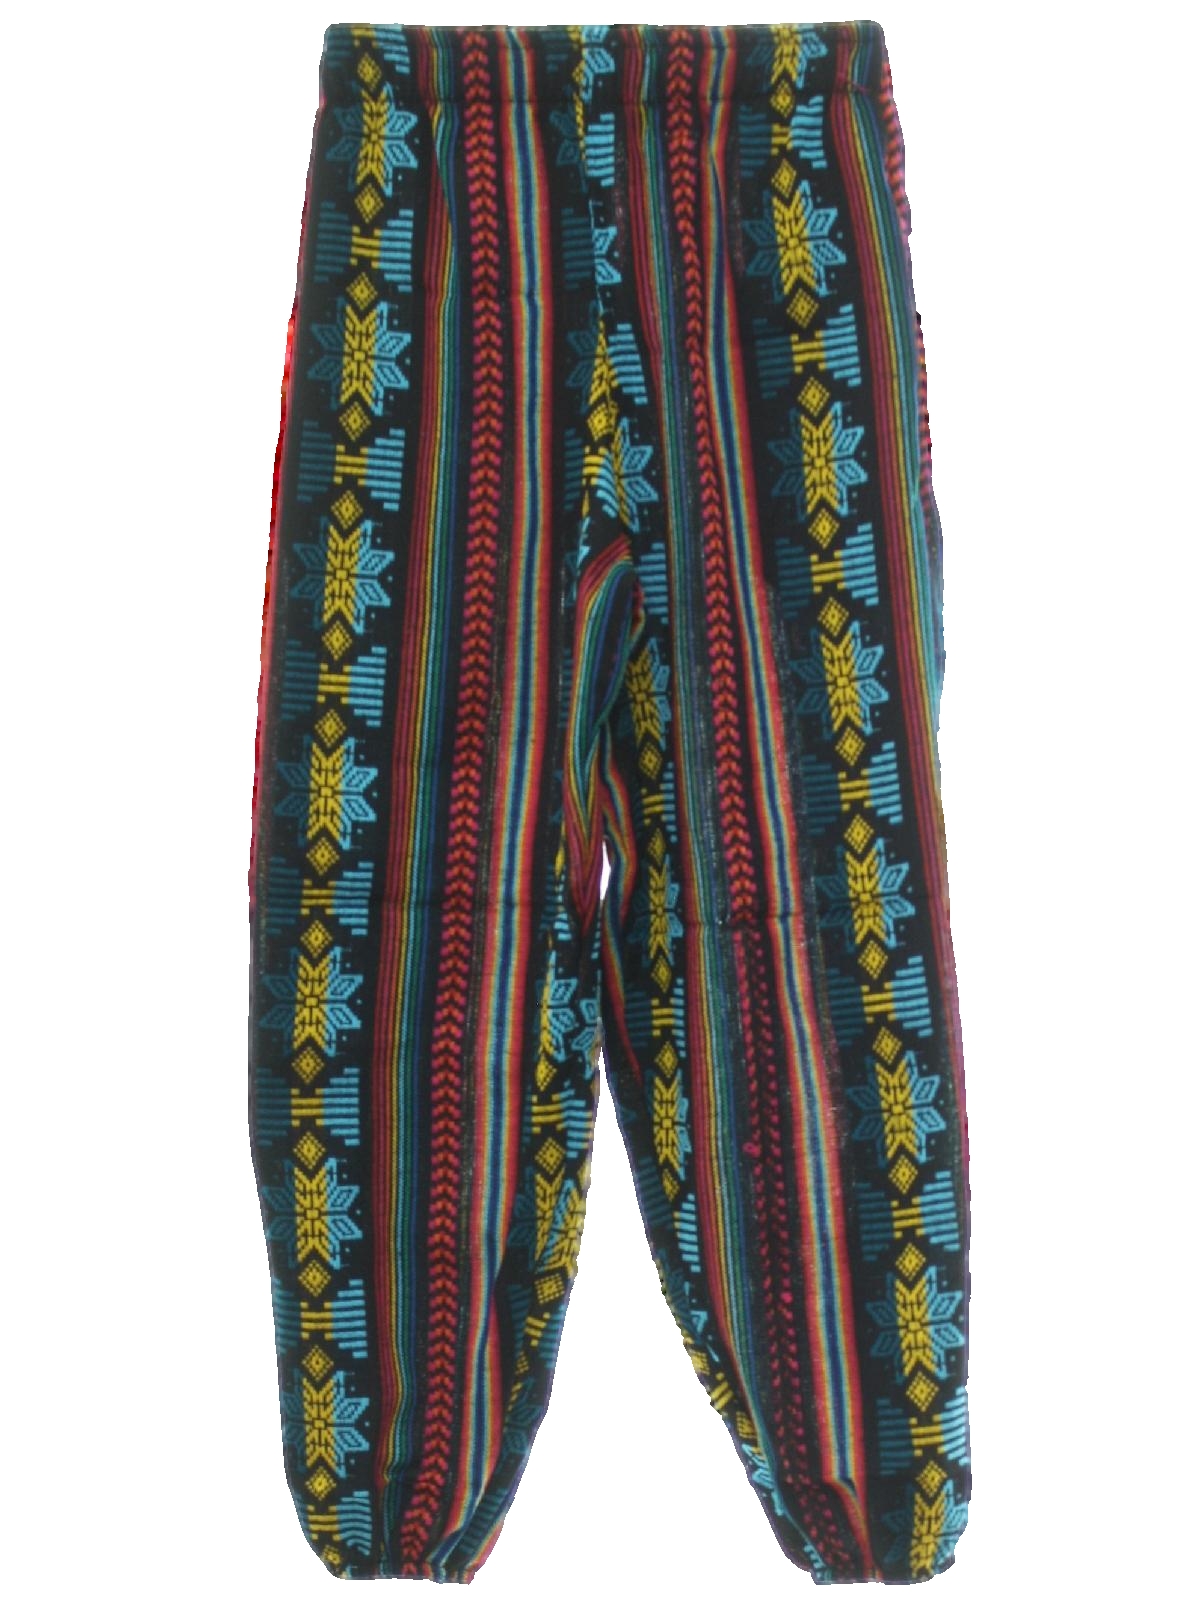 80s Pants (Reproduction): 80s style (made recently) -Reproduction- Mens ...